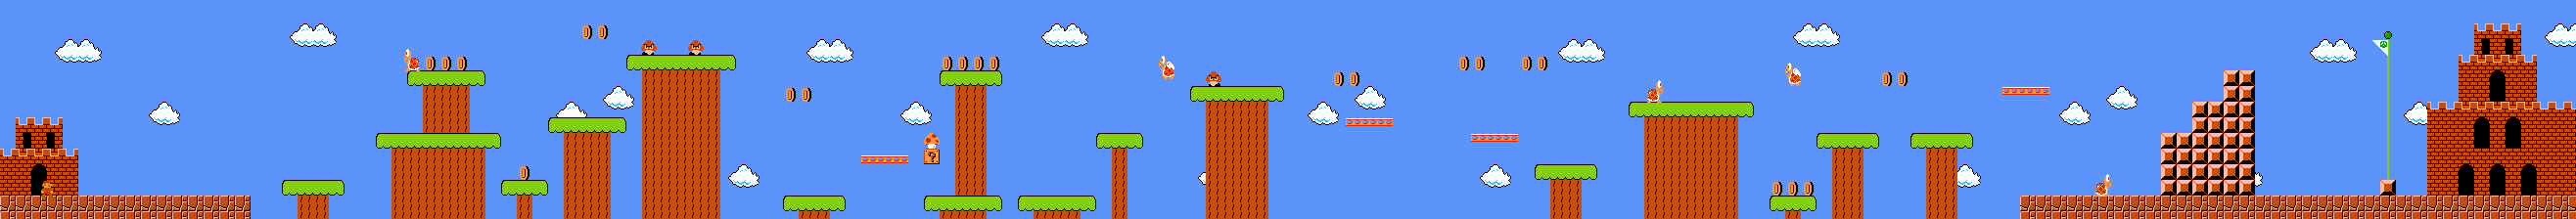 old super mario bros how many levels